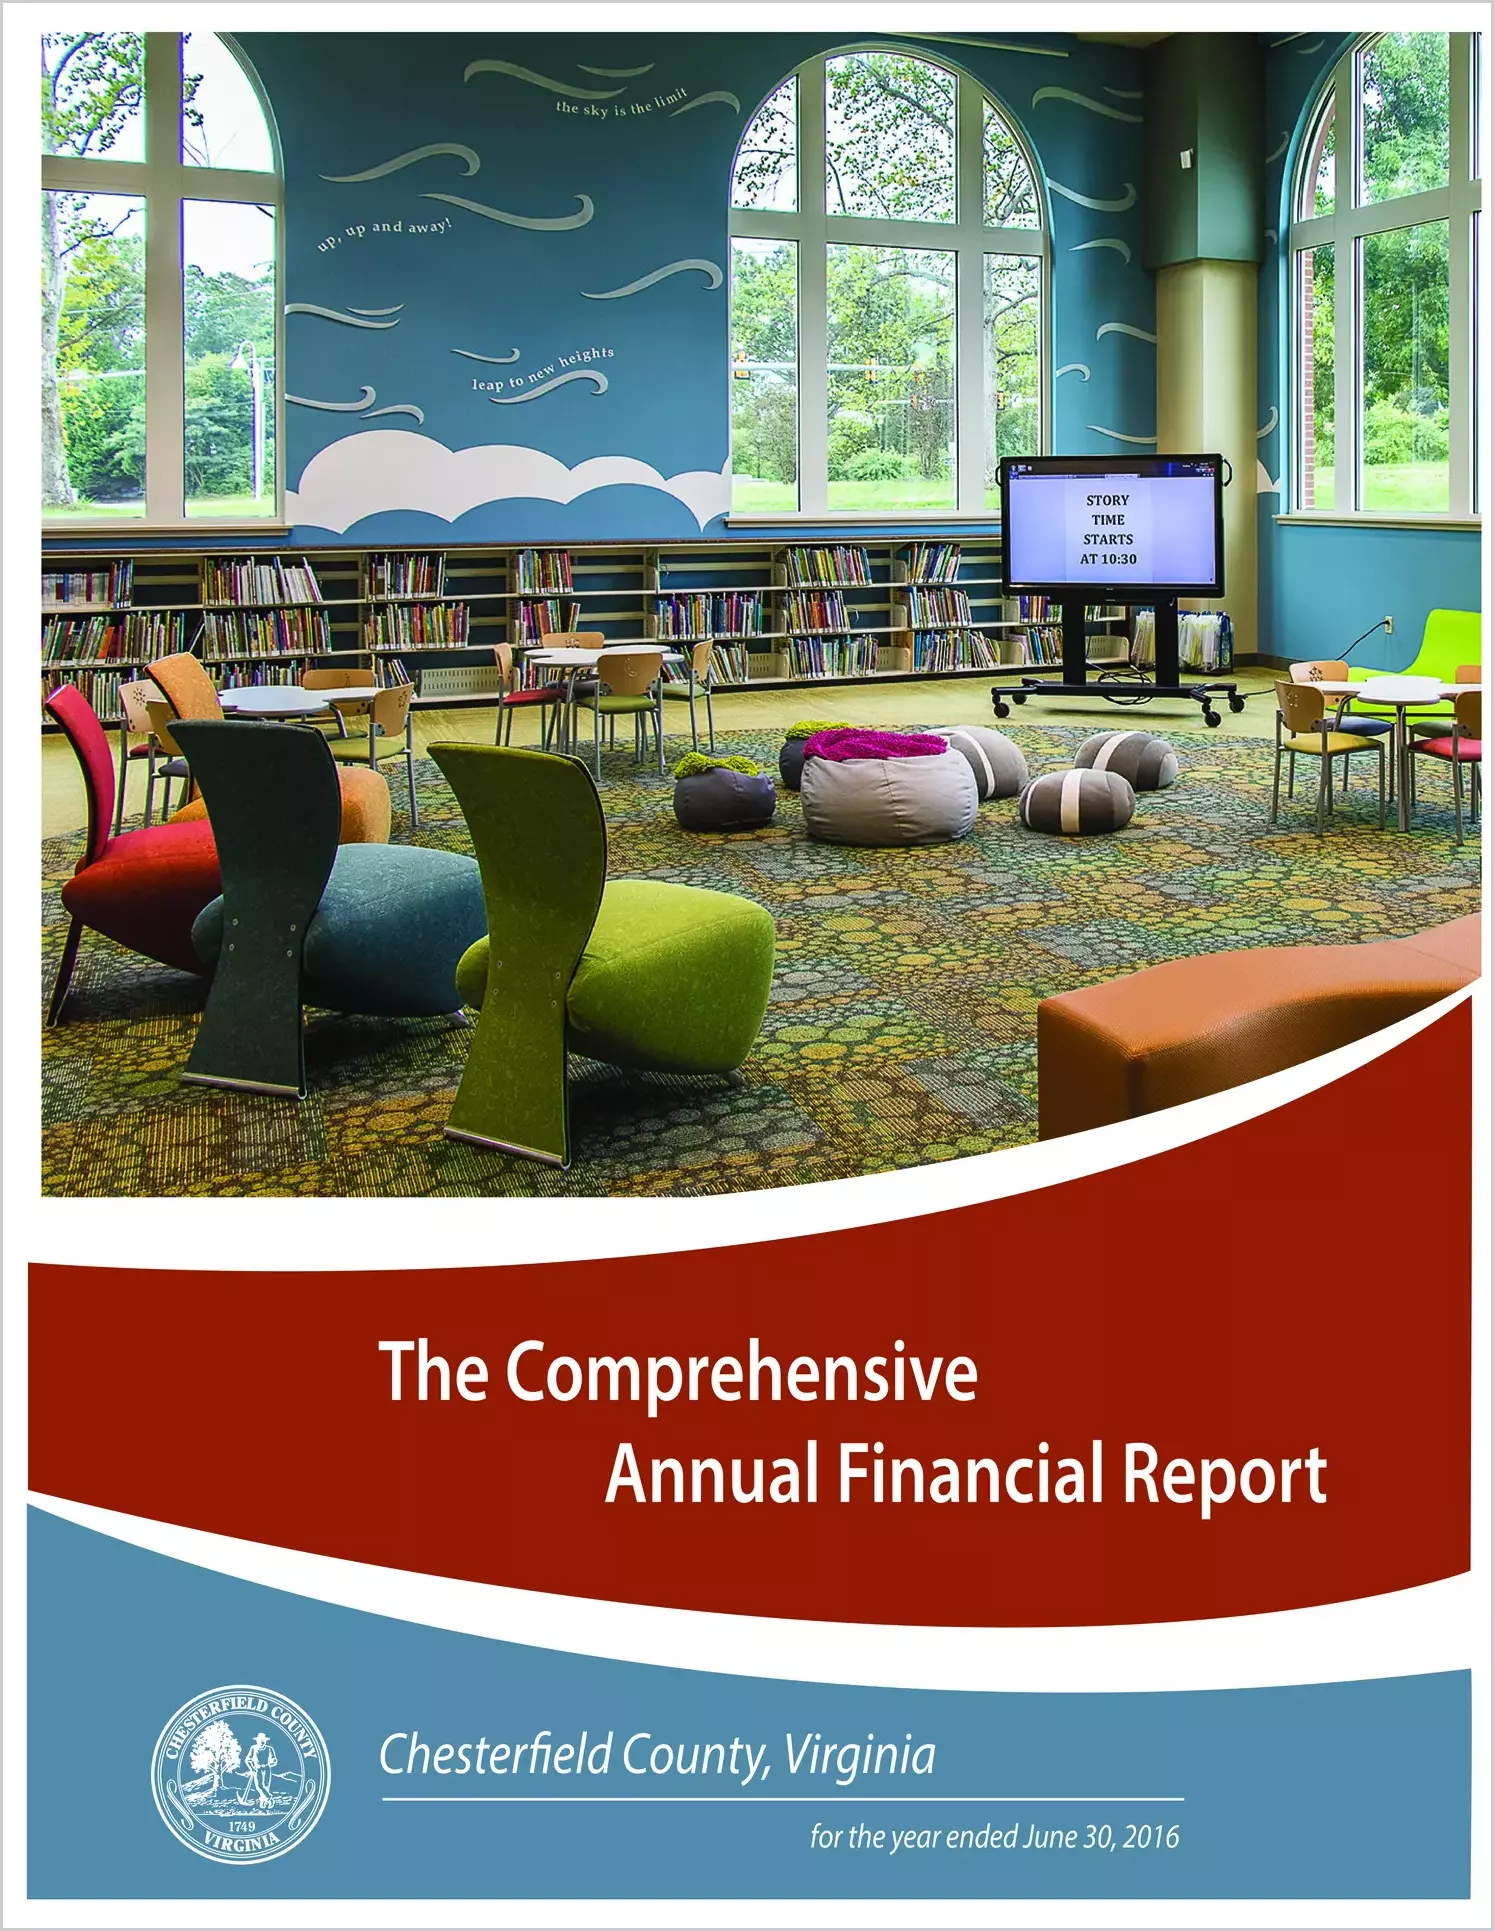 2016 Annual Financial Report for County of Chesterfield